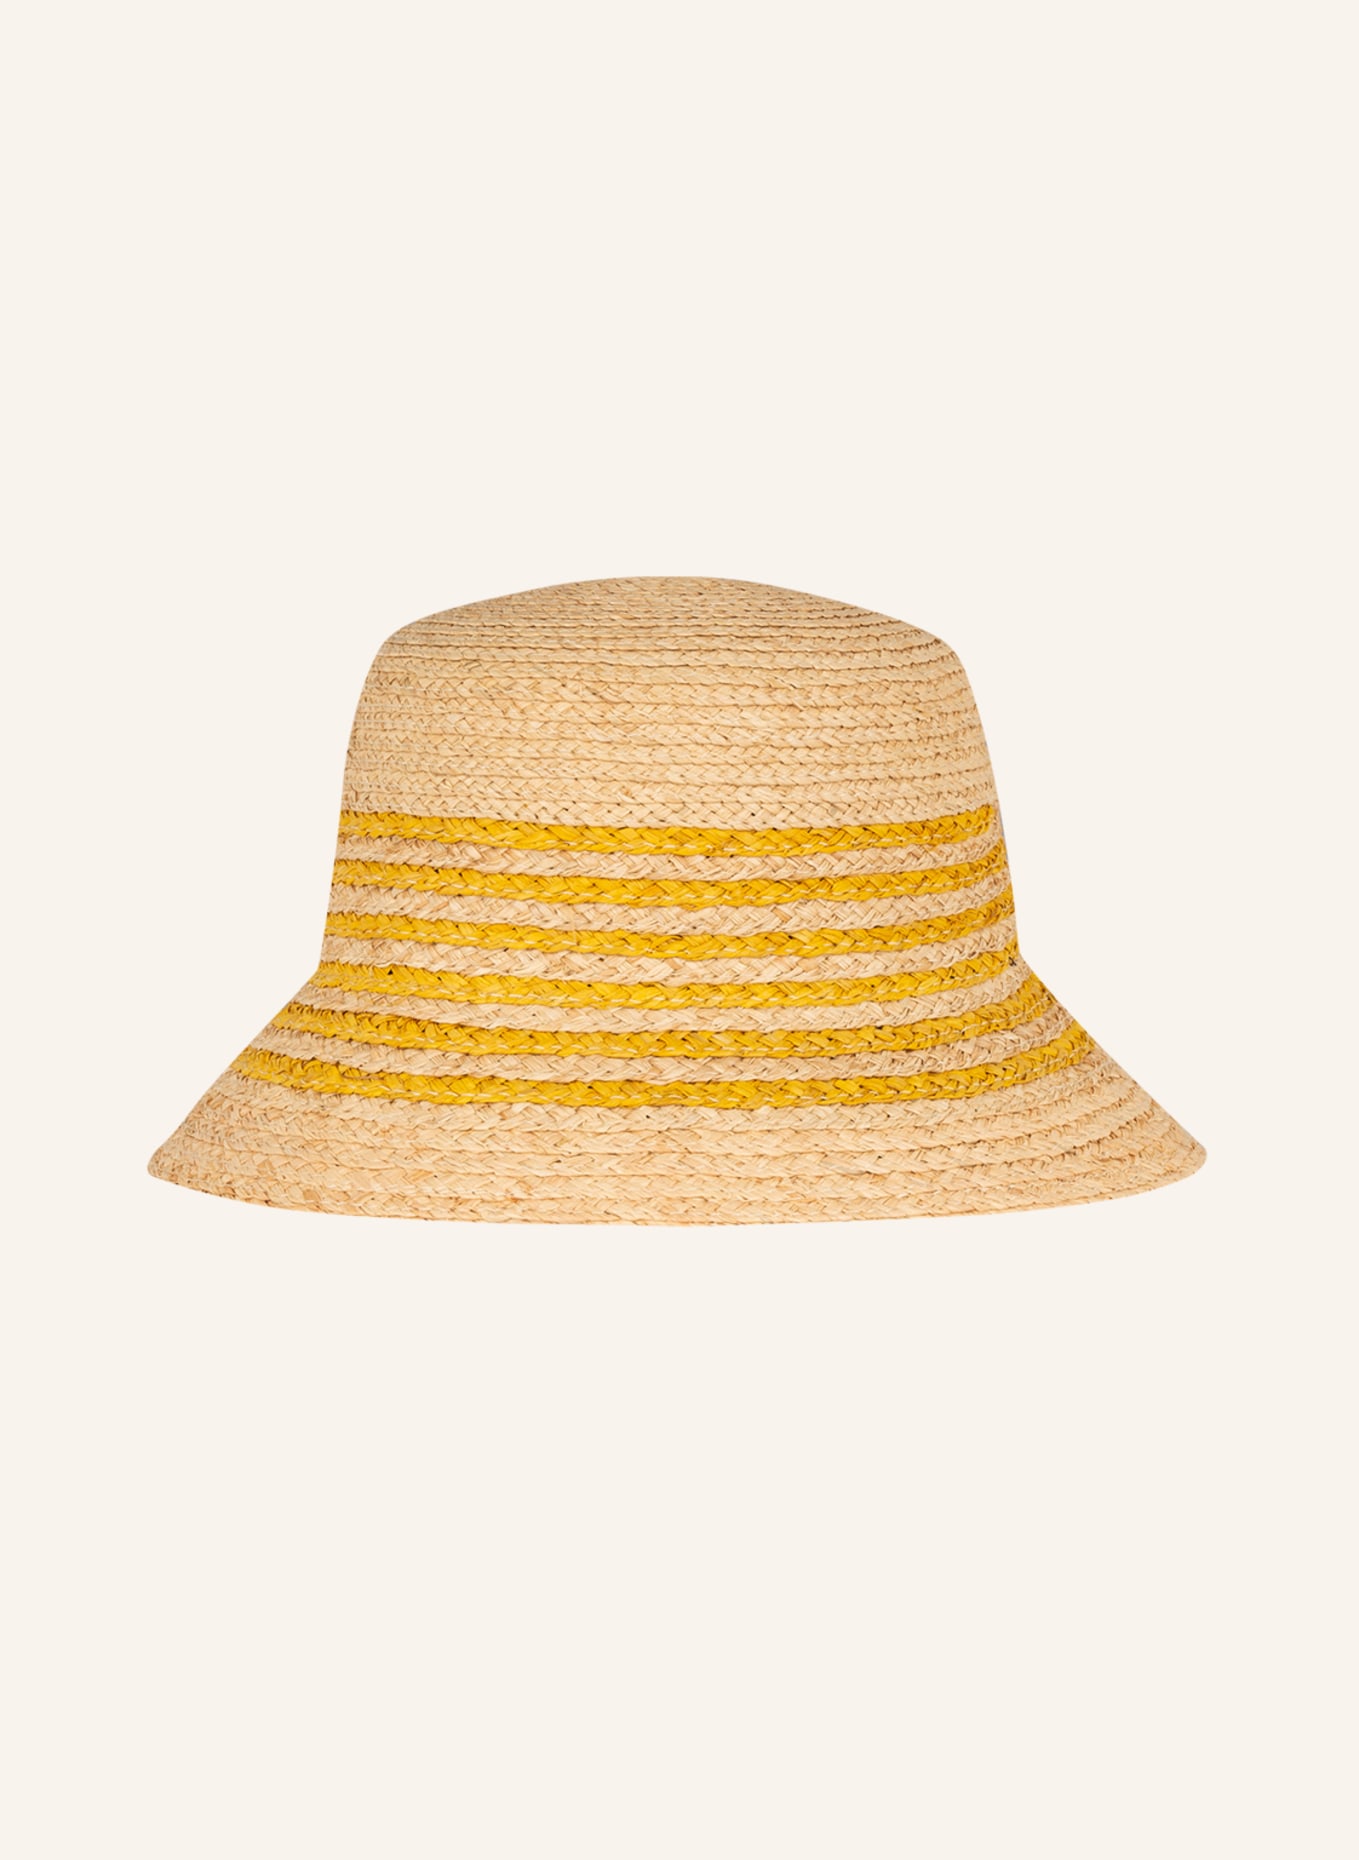 SEEBERGER Straw hat, Color: BEIGE/ YELLOW (Image 2)